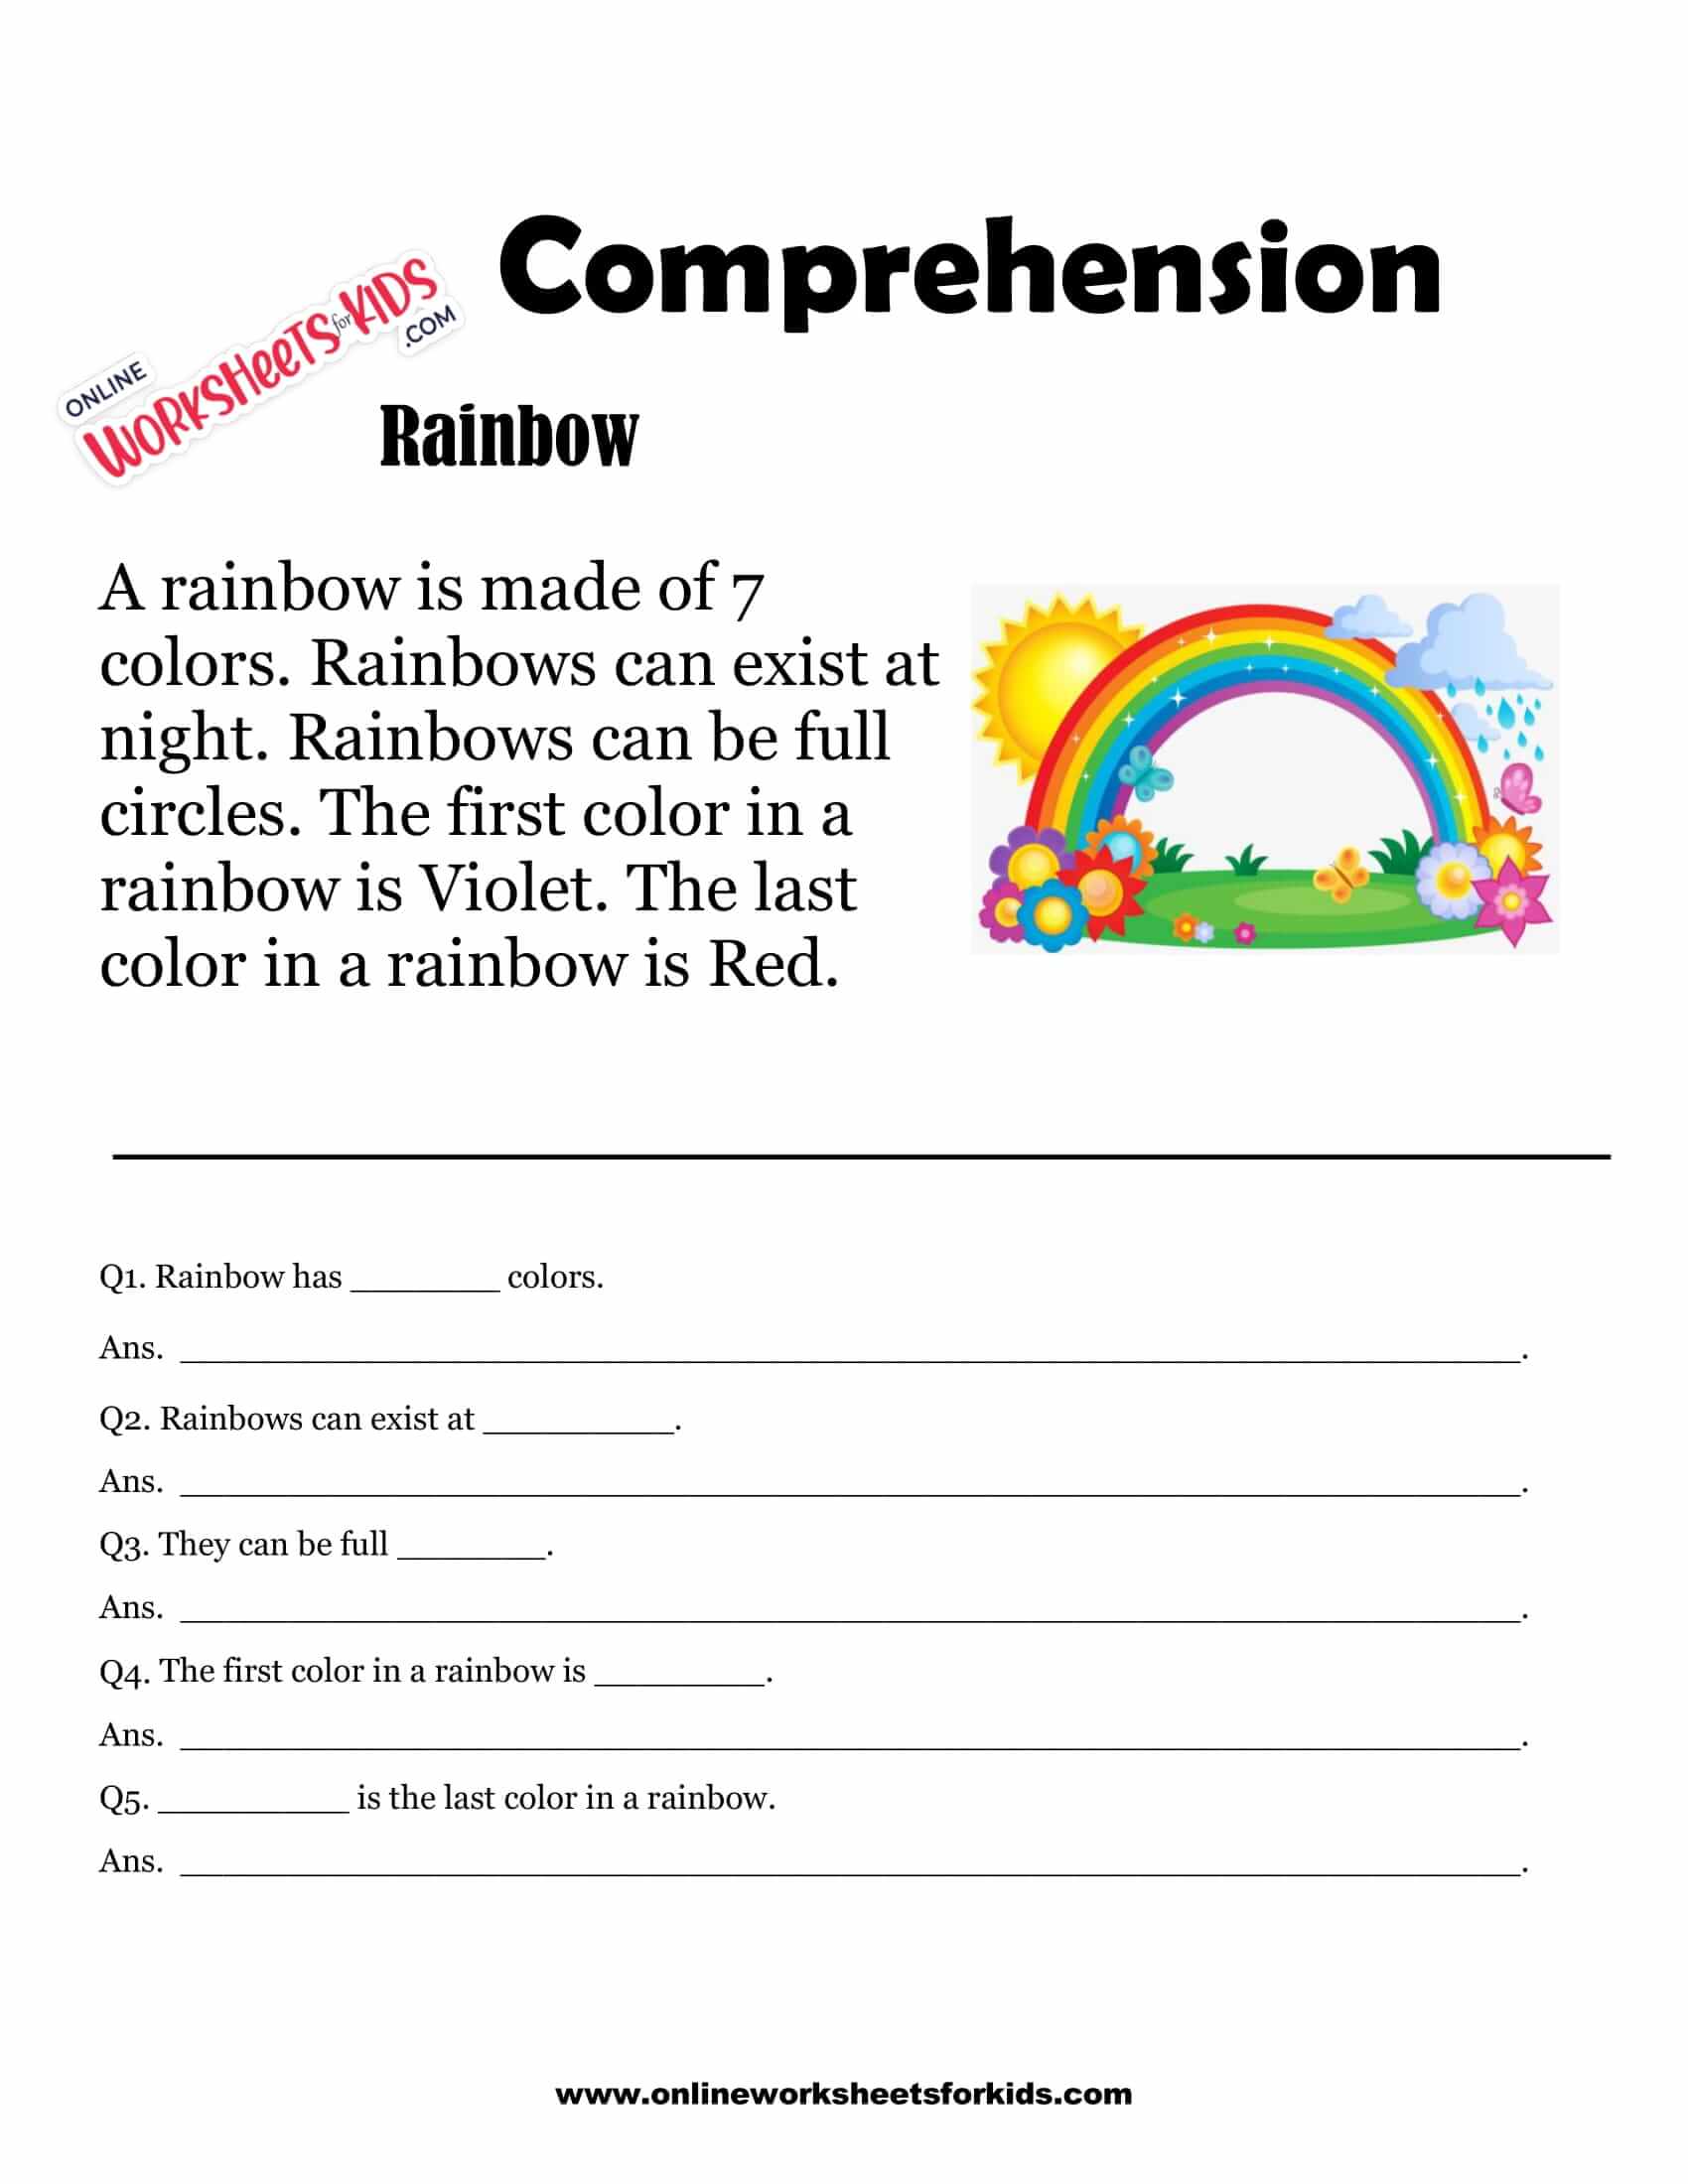 Free Printable Picture Comprehension Worksheets For Grade 1